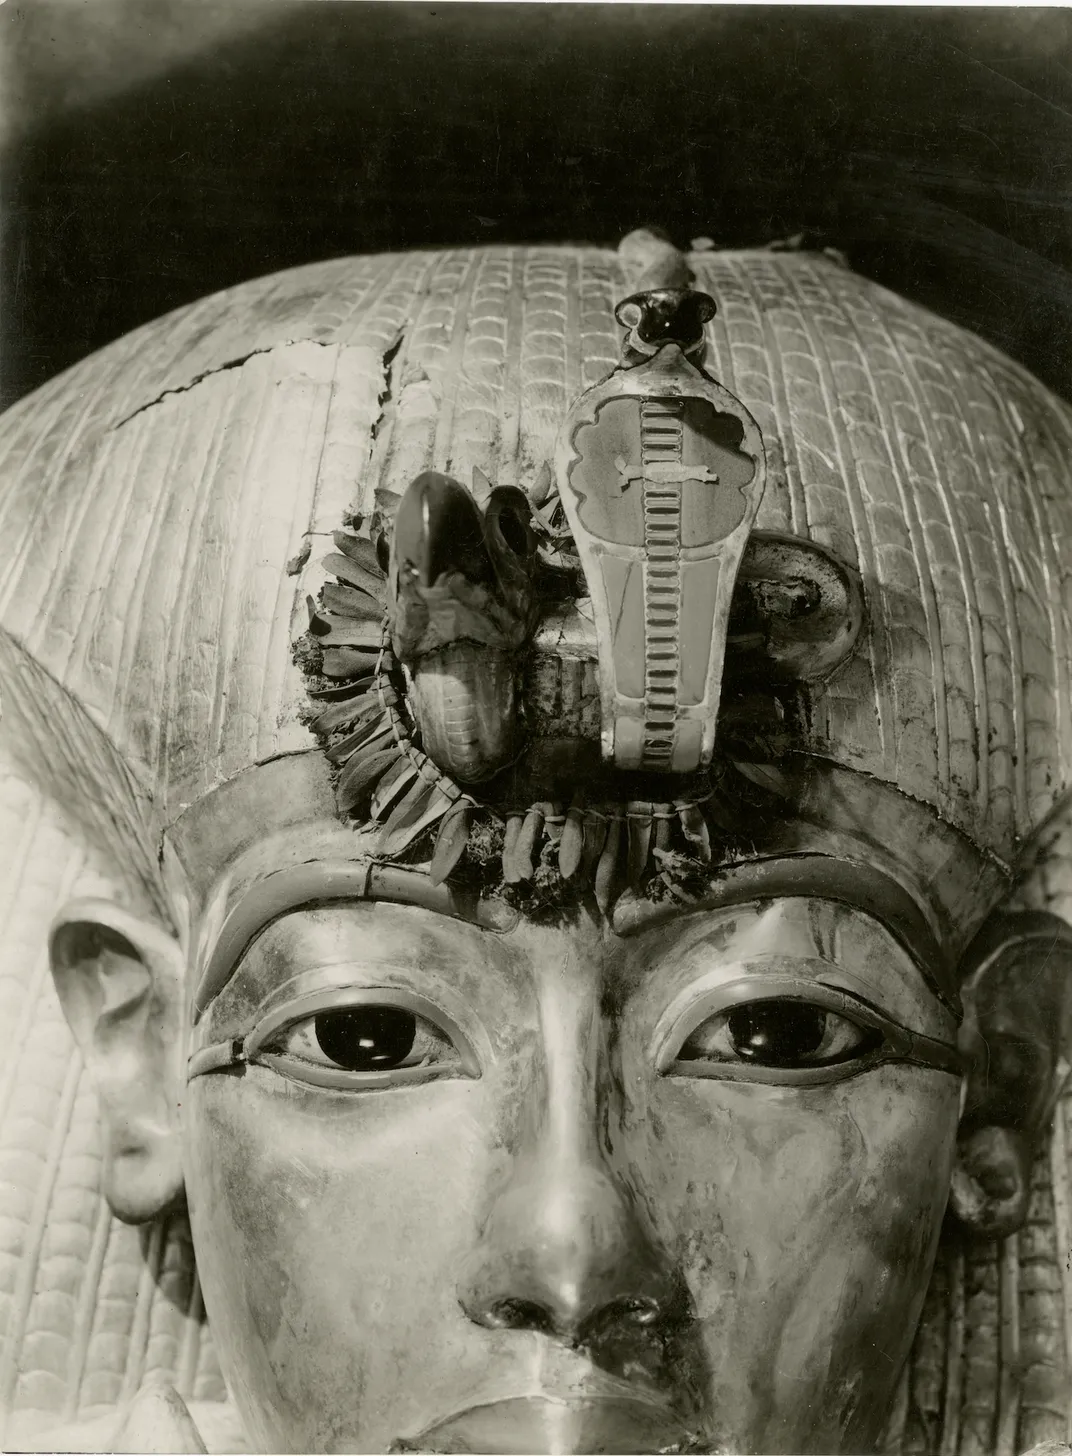 A small garland of cornflowers and olive leaves, on the royal insignia of cobra and vulture on the forehead of Tutankhamun’s outer coffin